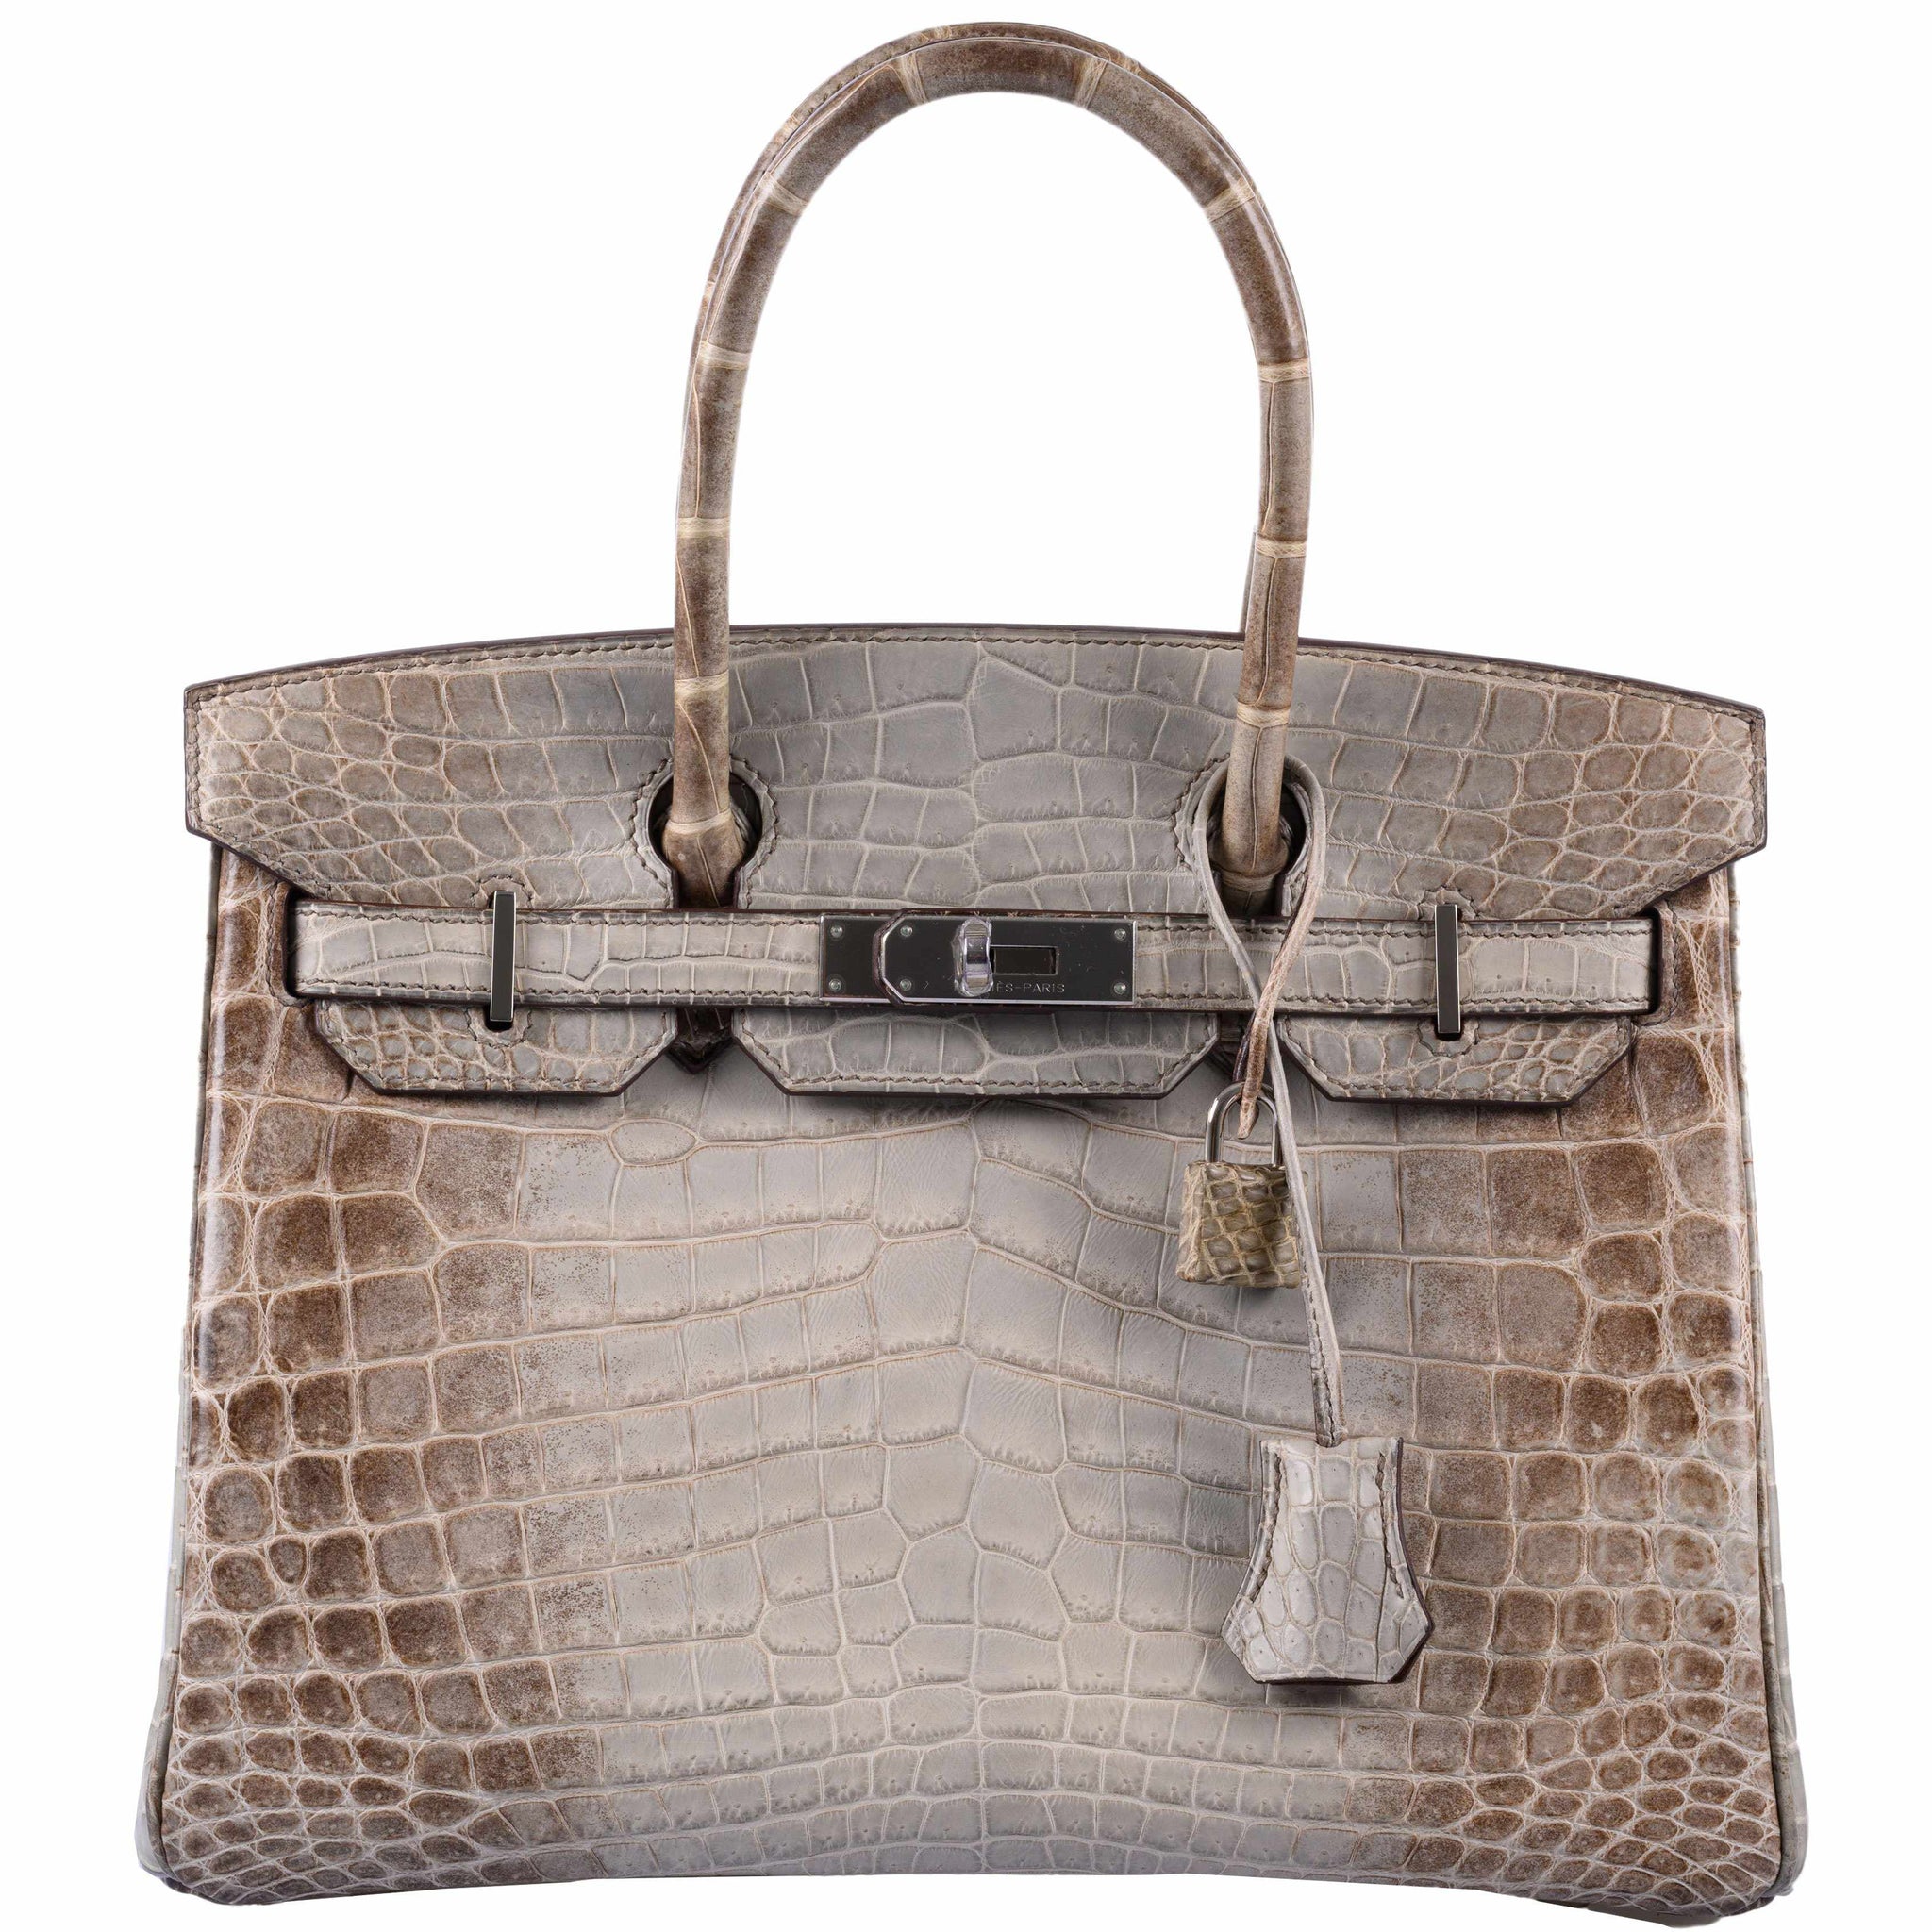 Replica Hermes Touch Birkin 30 Bag In Gris Asphalt Clemence and Shiny  Niloticus Crocodile Skin